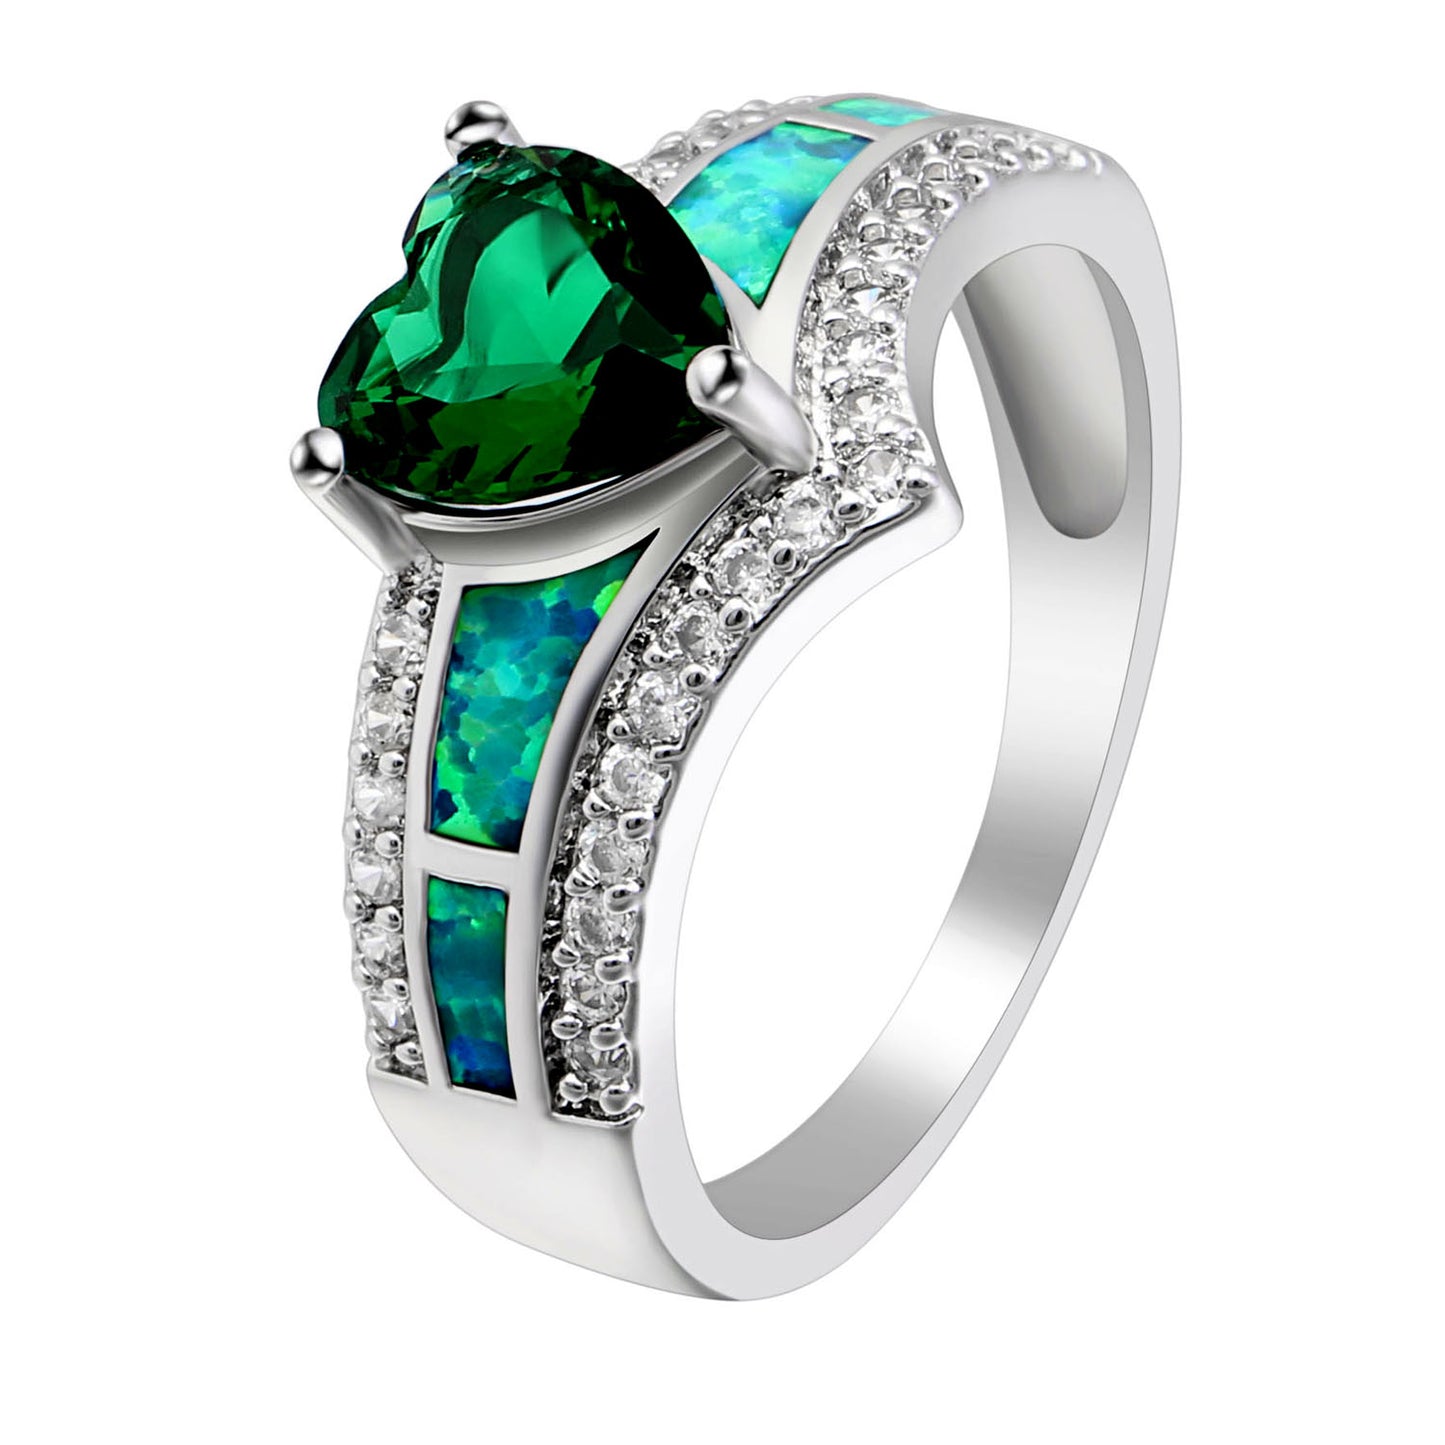 Majestic Heart Cz Promise Ring Created Fire Opal Girl Women Ginger Lyne Collection - Green,10